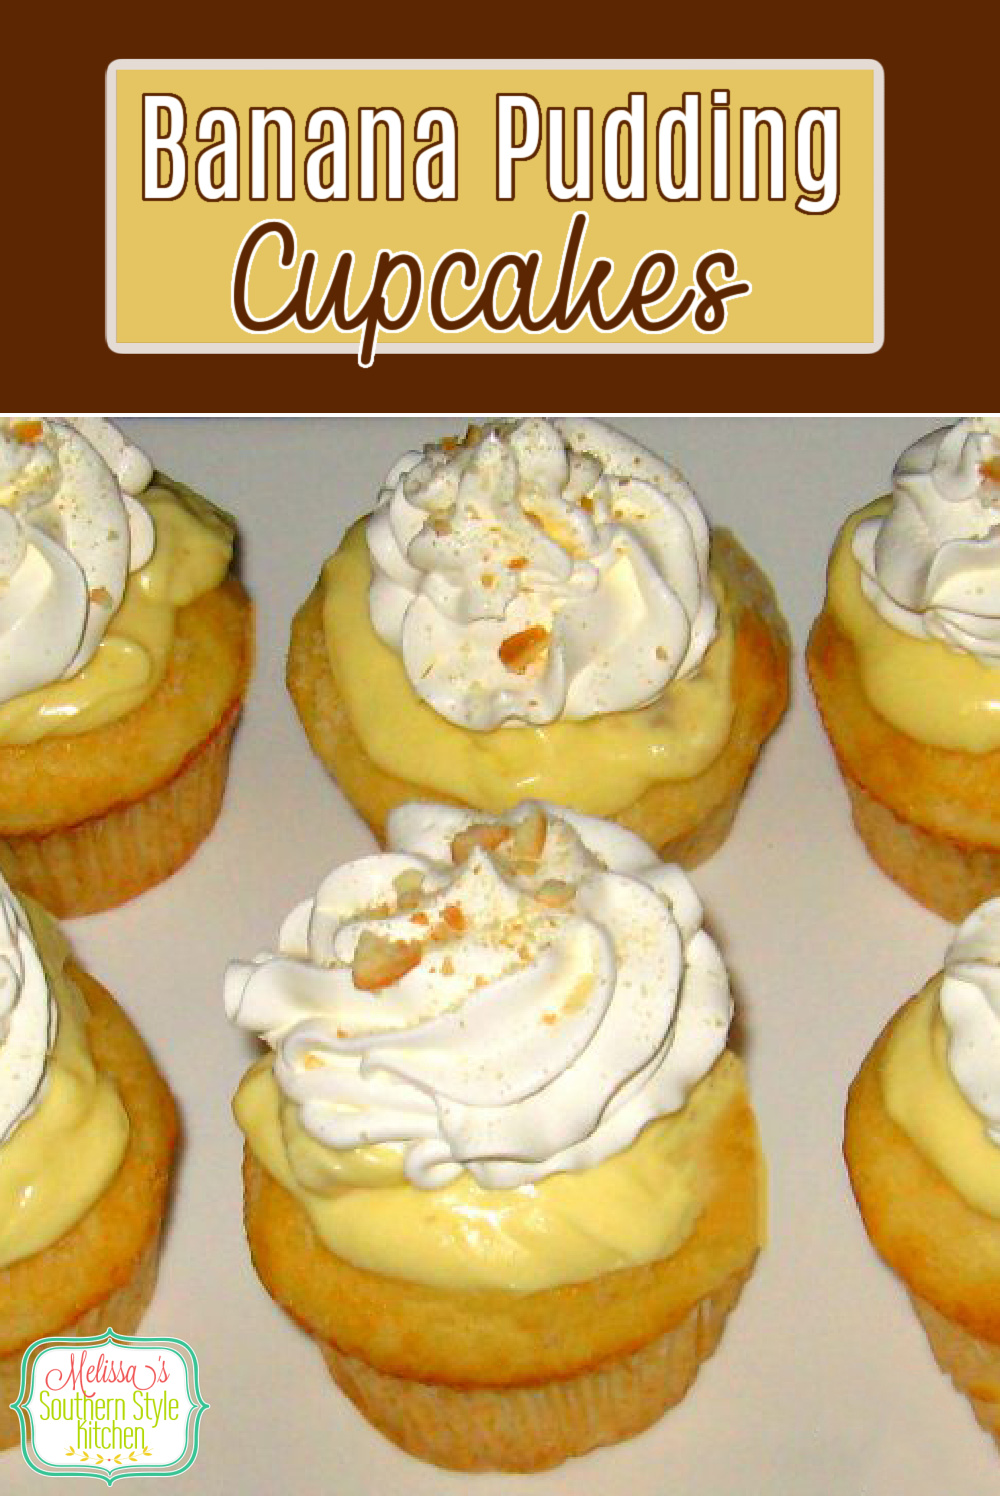 Banana Pudding Cupcakes are portable for picnics, barbecues, potluck parties and tailgating #bananapudding #bananapuddingcupcakes #bananas #pudding #southernbananapudding #cupcakes #desserts #dessertfoodrecipes via @melissasssk